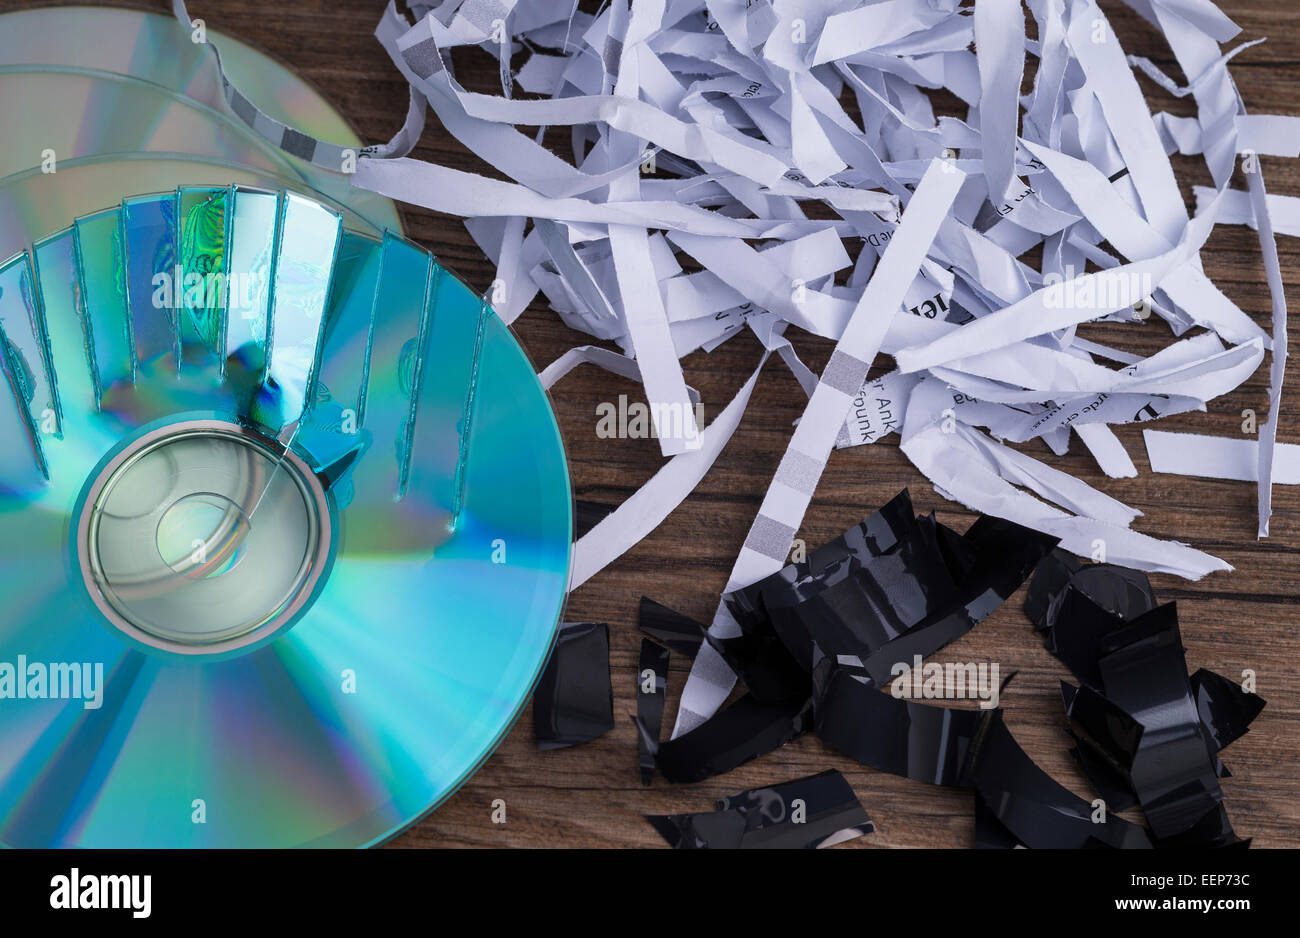 Image shows paper shavings, tape shred and some compact disks Stock Photo